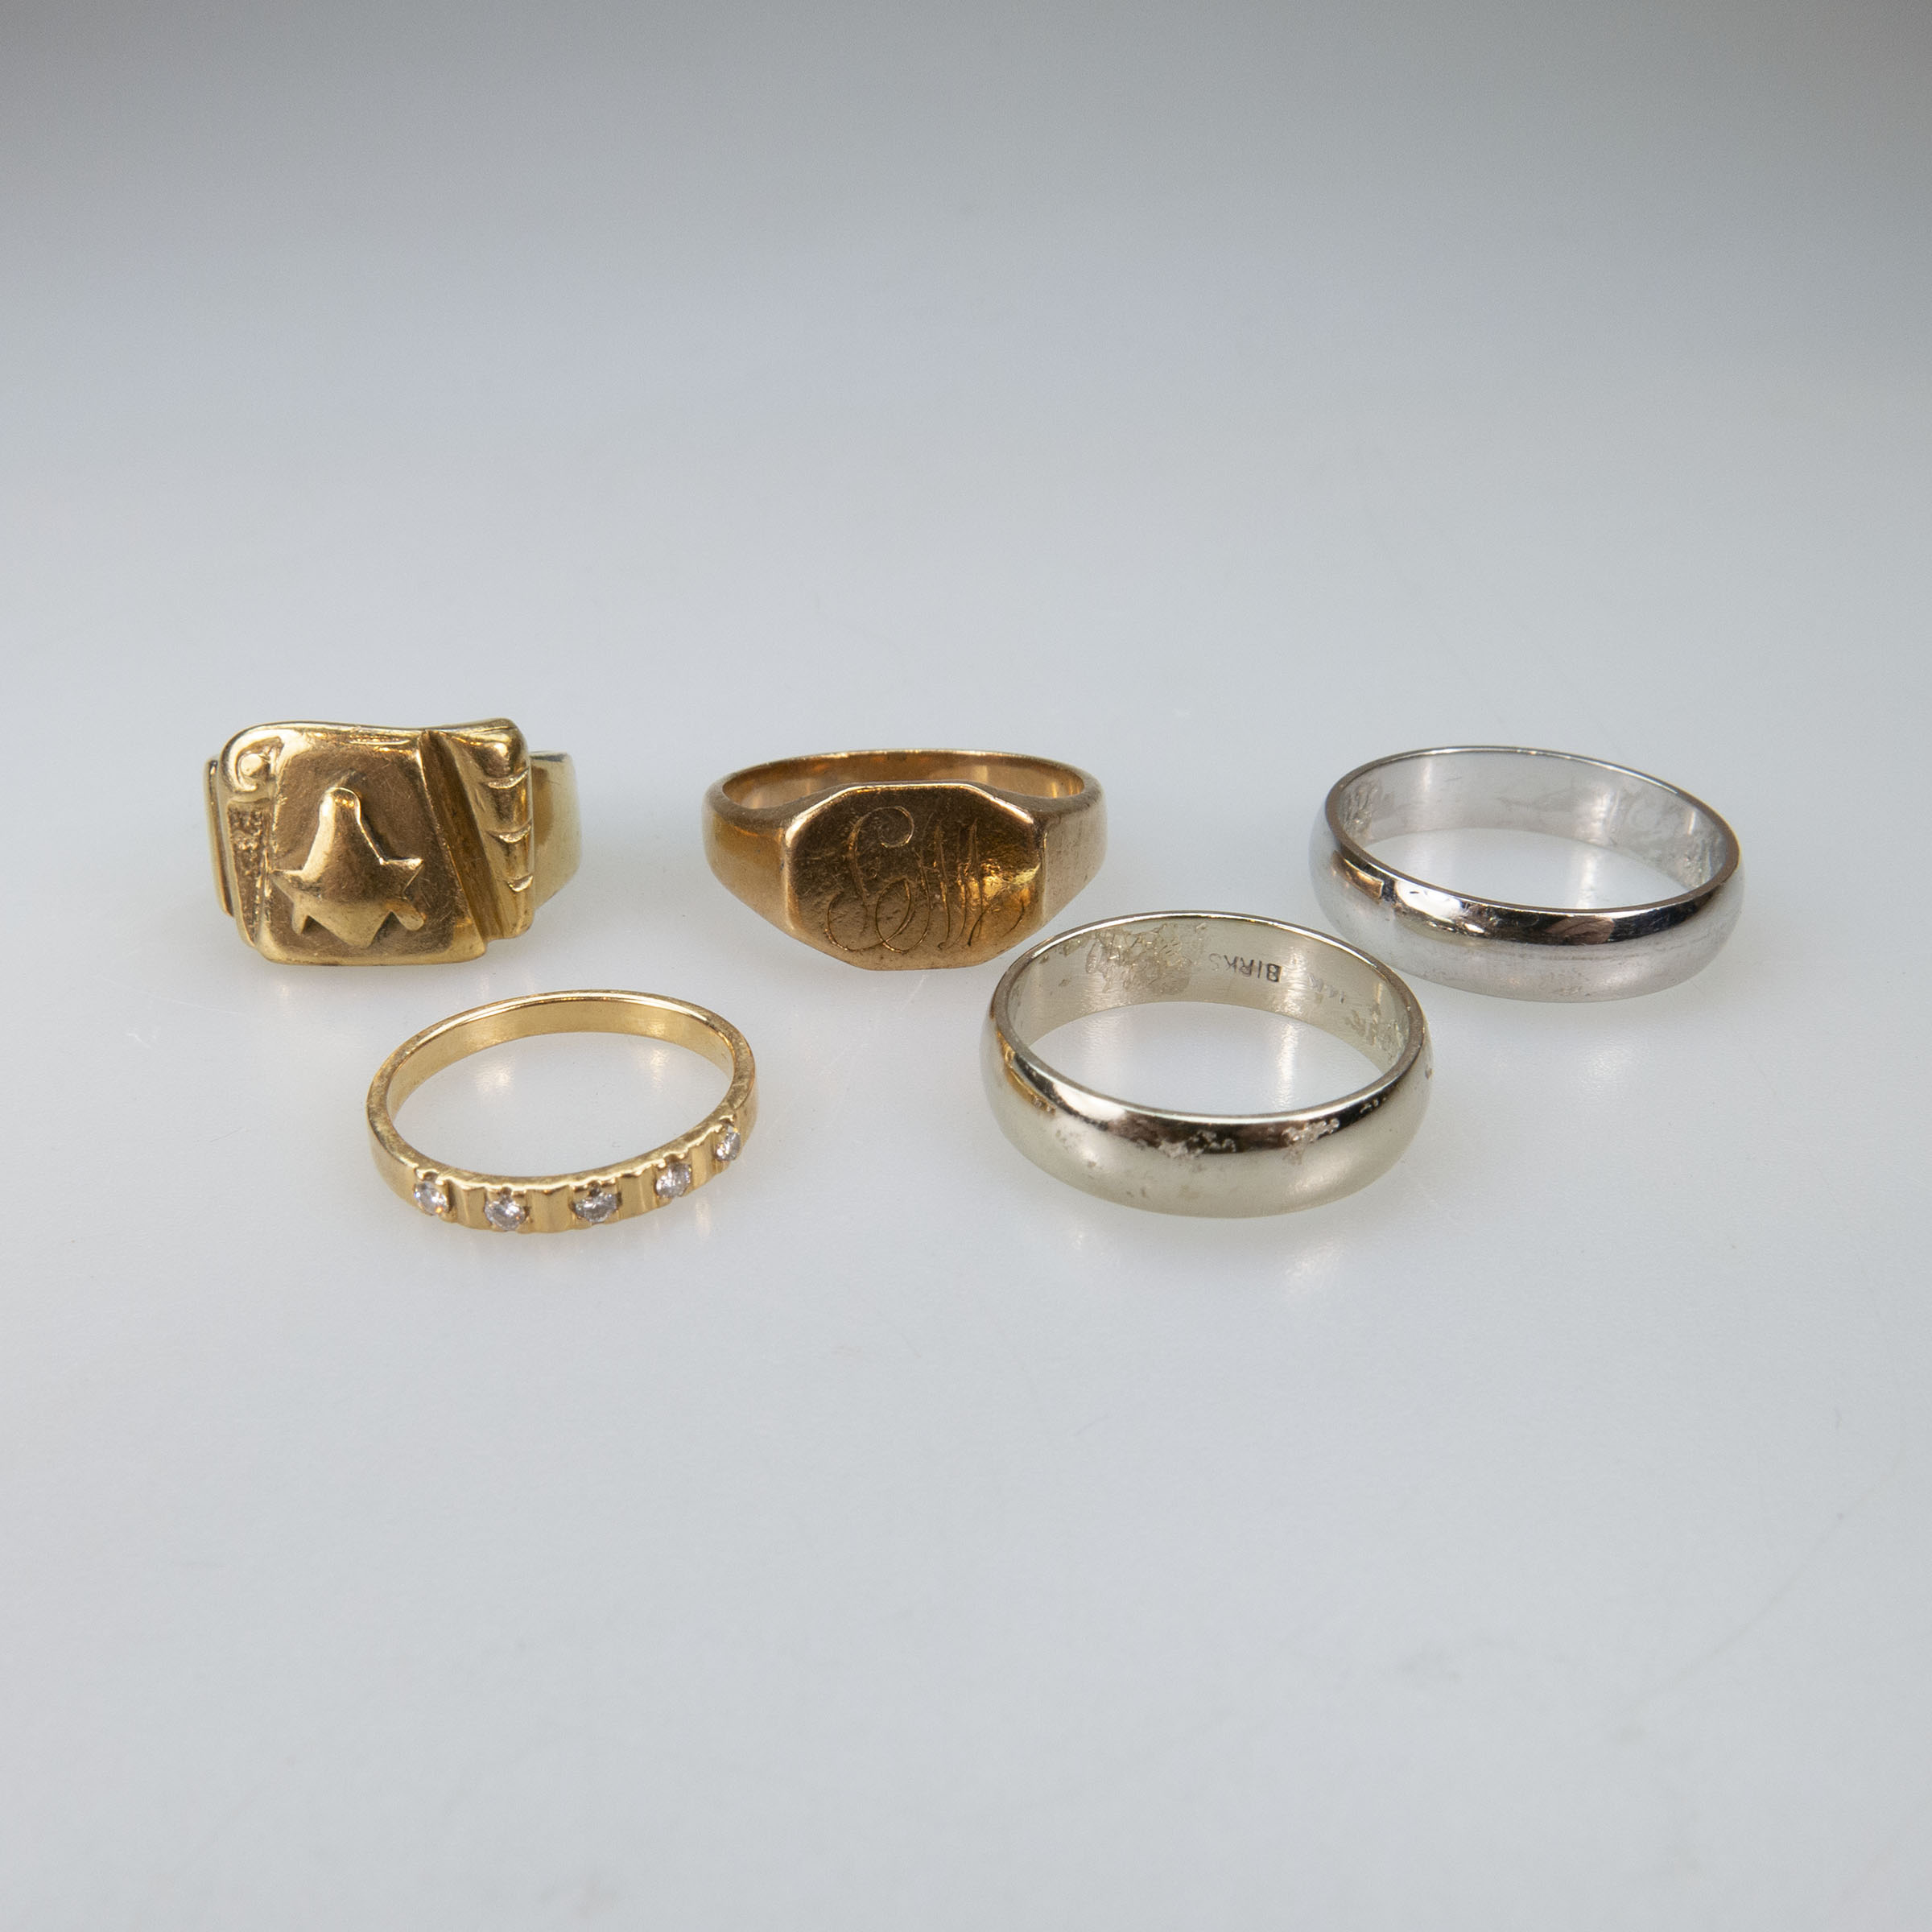 2 x 10k & 3 x 14k Gold Rings And Bands